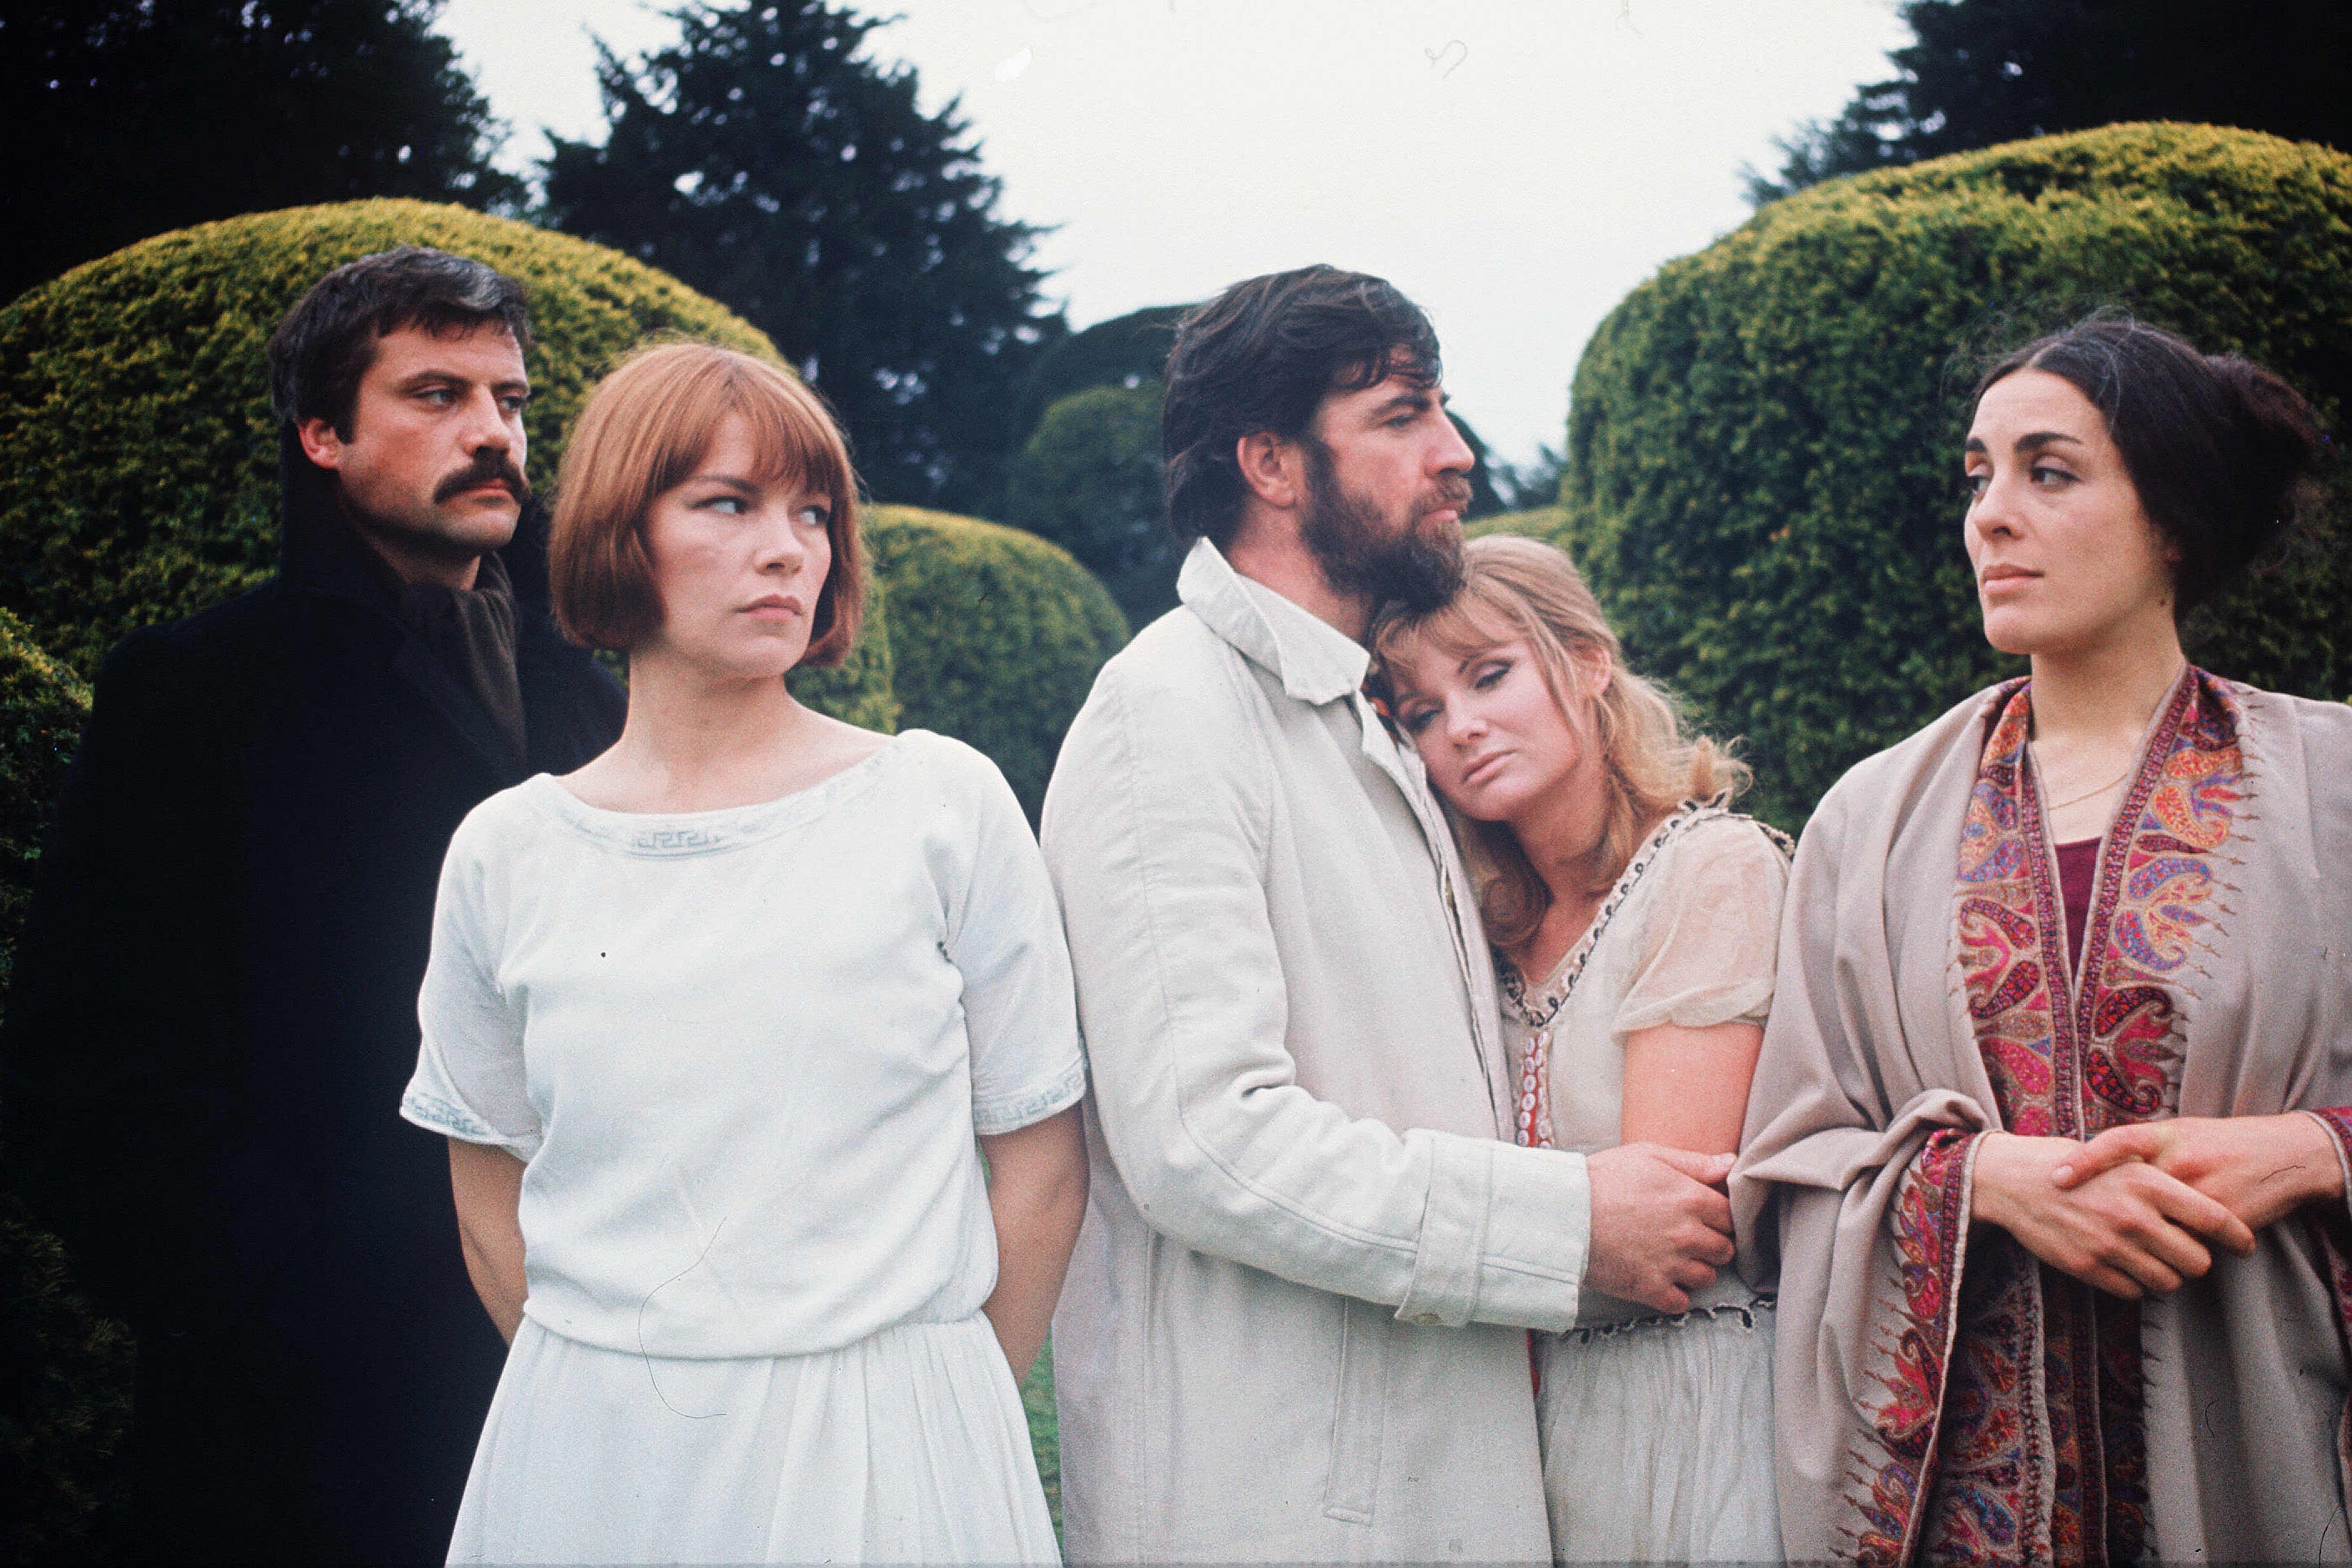 ‘Women in Love’ stars left to right: Oliver Reed, Glenda Jackson, Alan Bates, Jennie Linden and Eleanor Bron